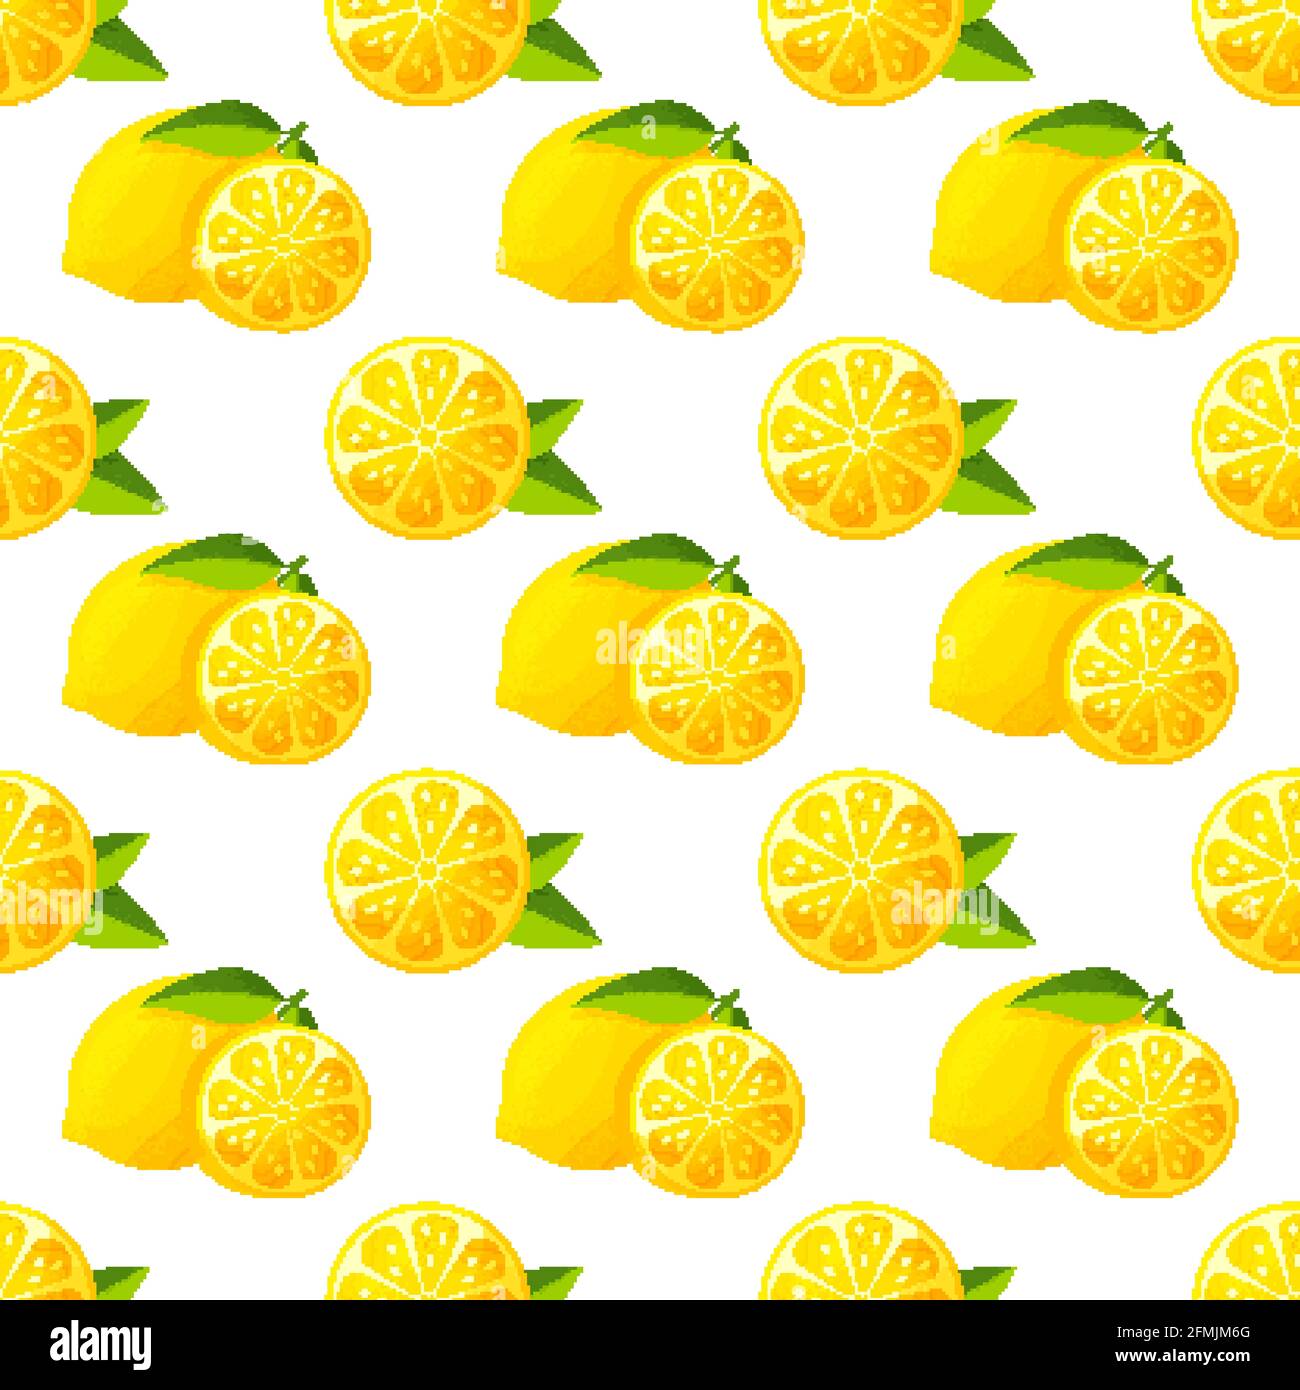 Seamless pattern with lemons. Vector background with citrus fruit and leaves. Stock Vector